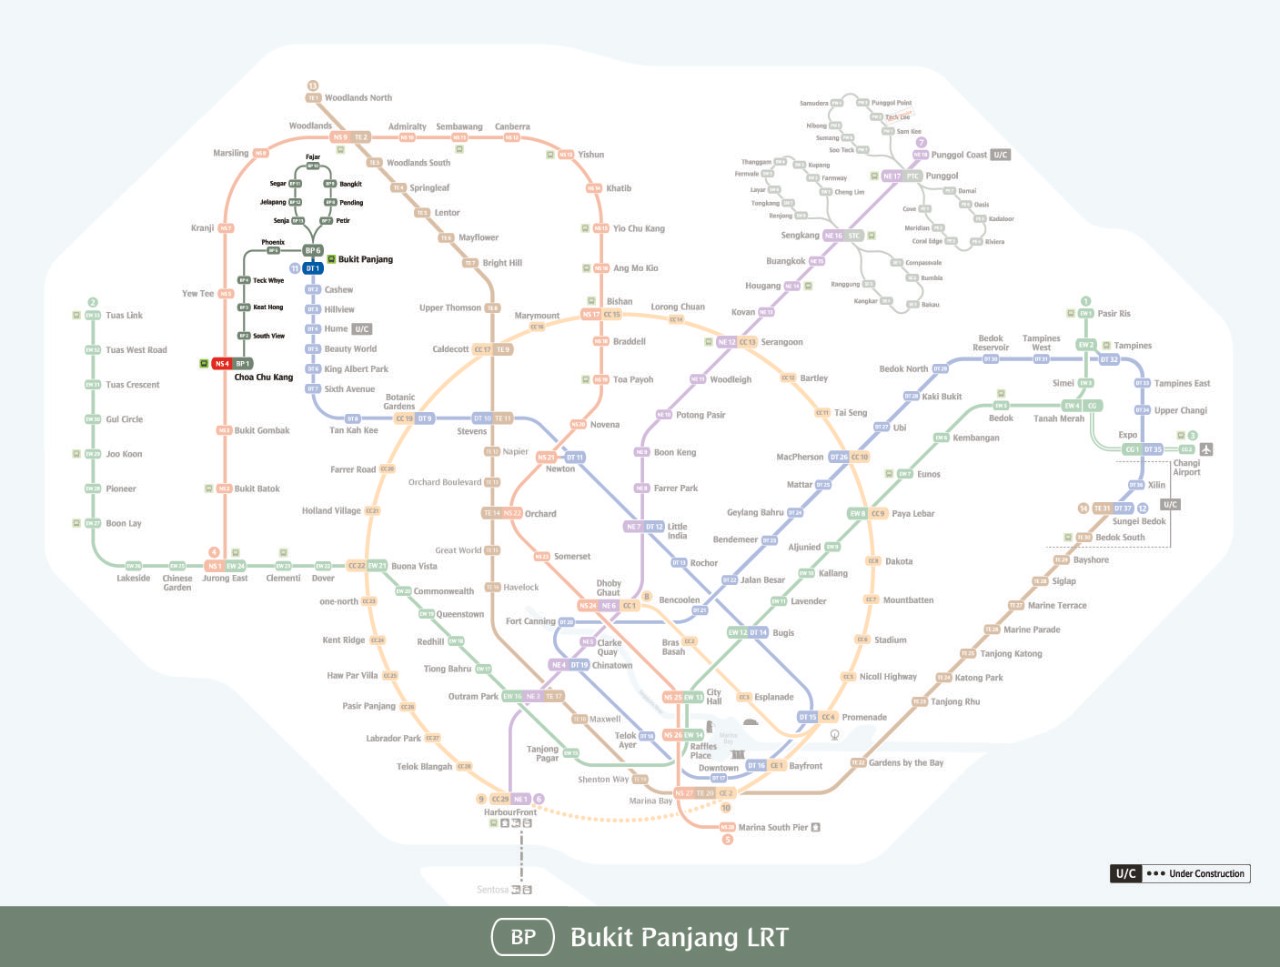 This is the system map for Bukit Panjang LRT.